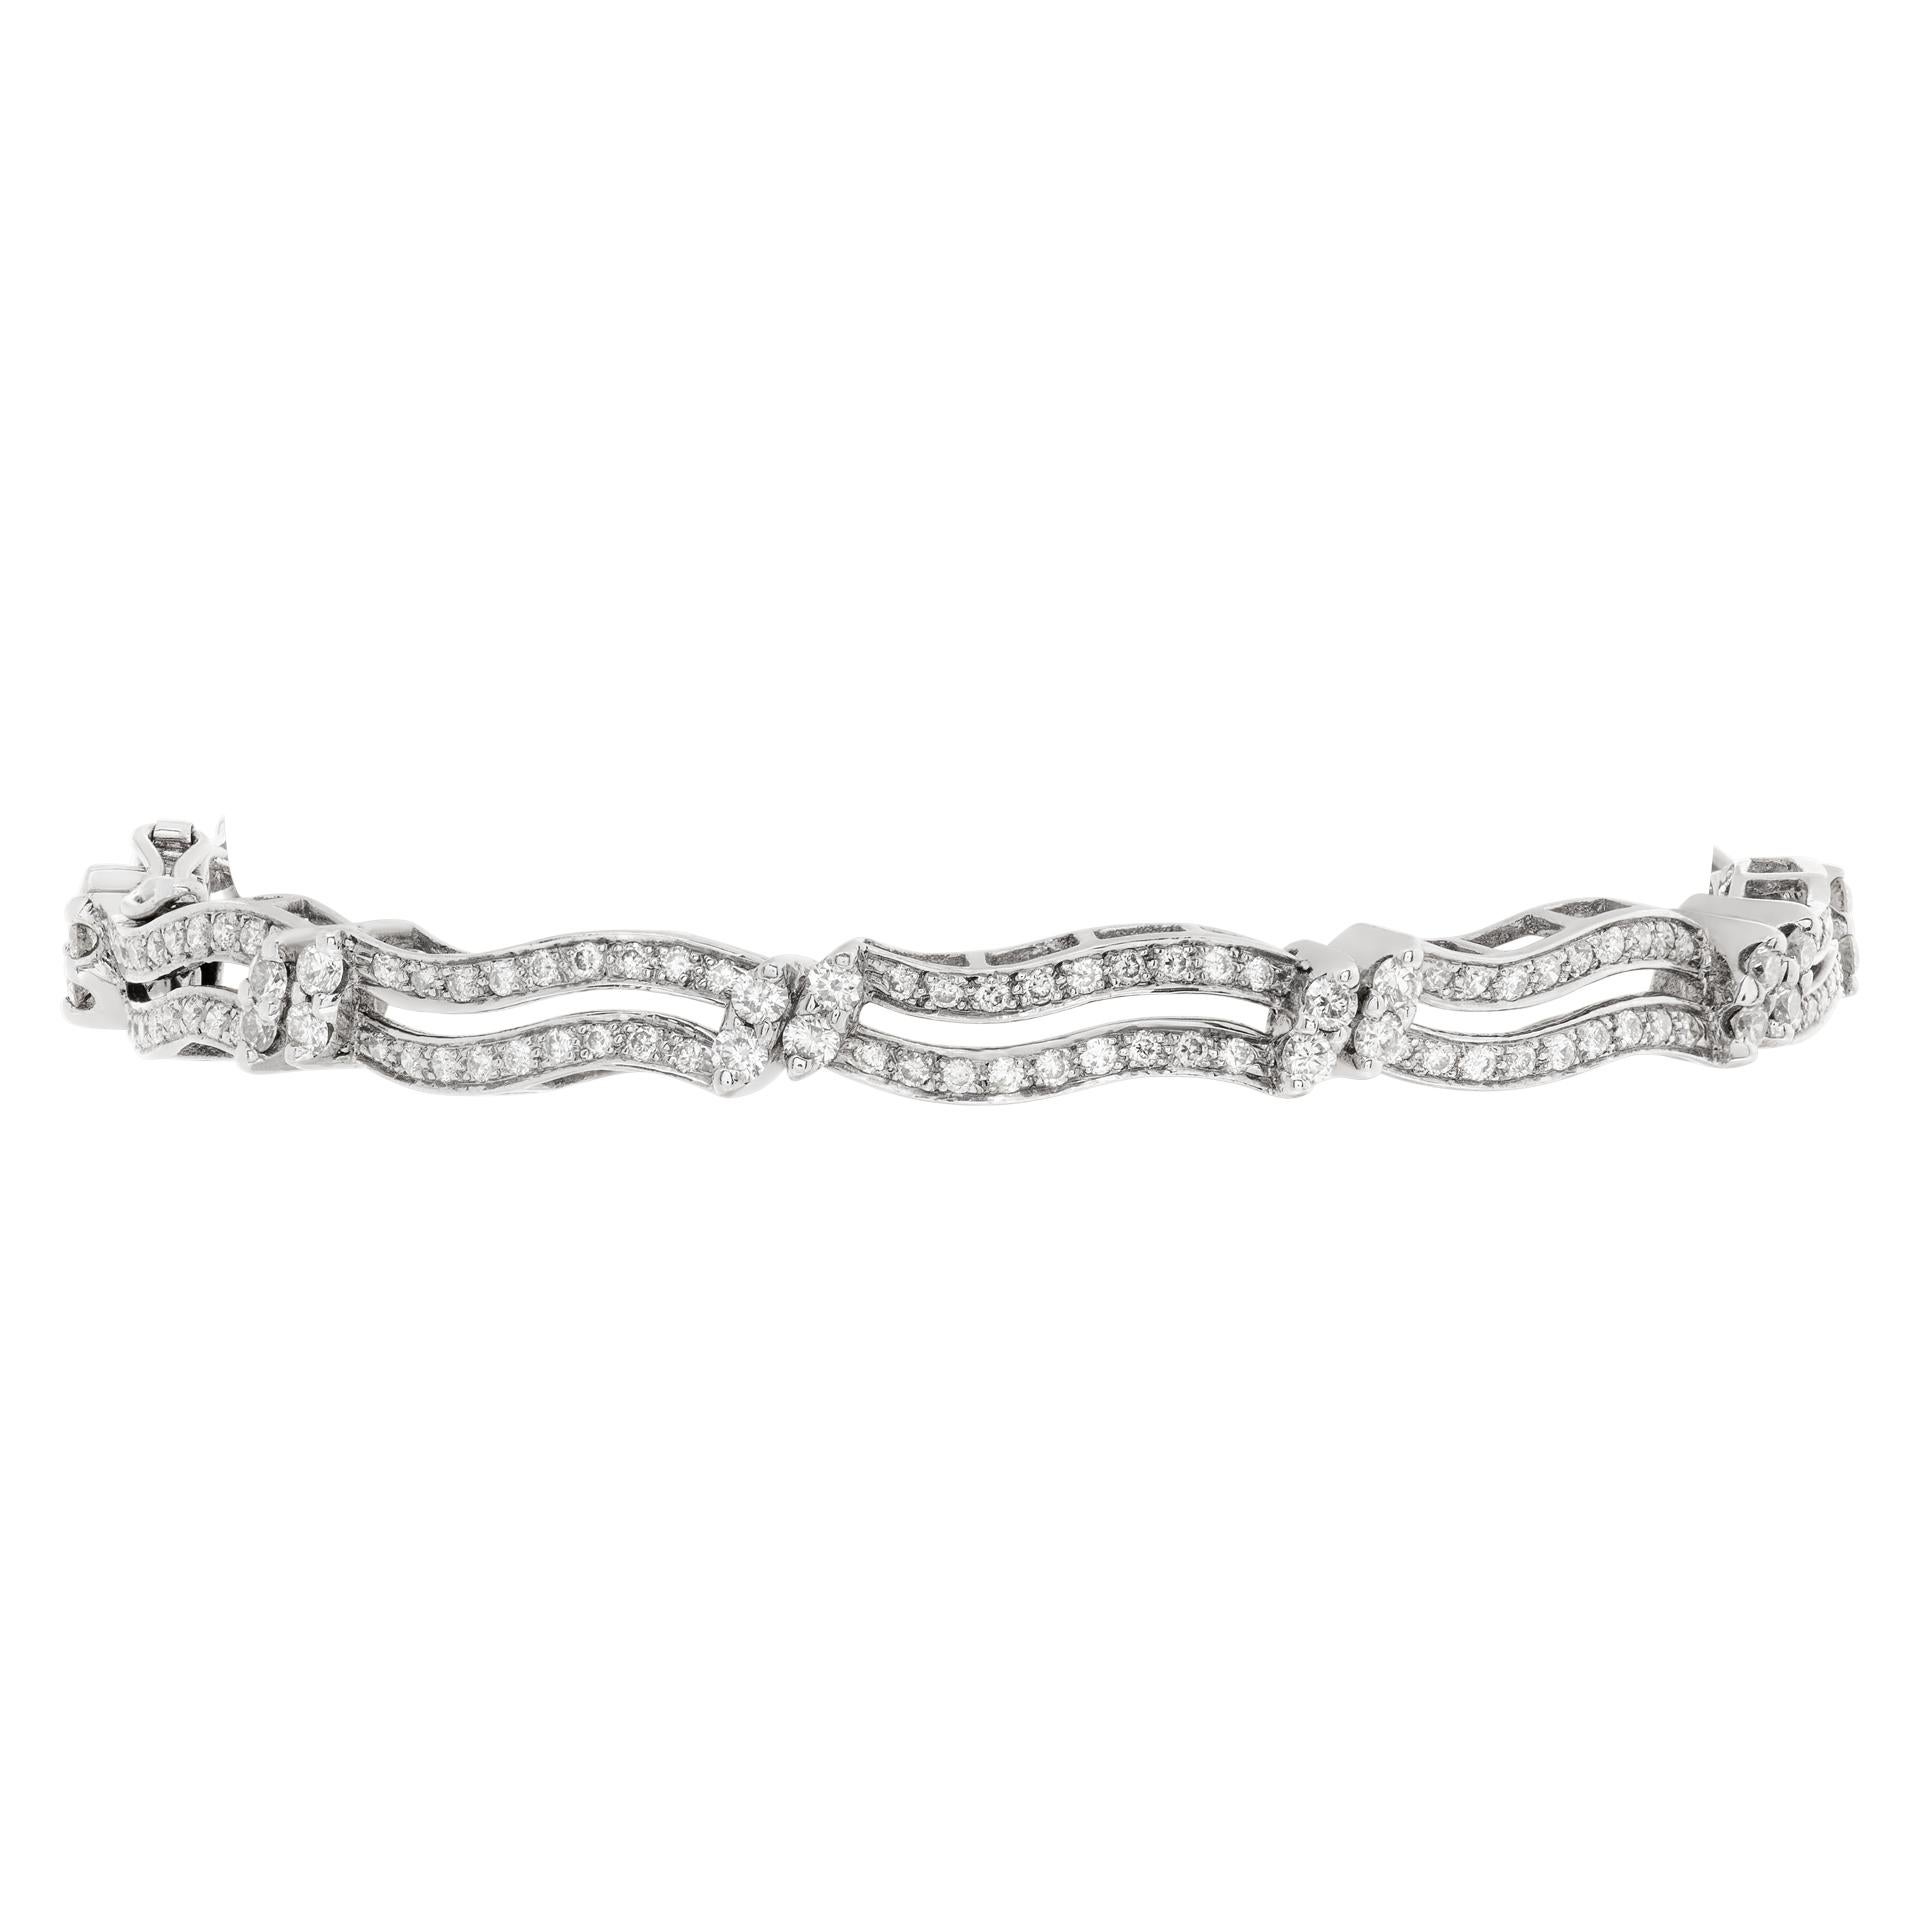 Diamond bangle in 18K white gold with approximately 1 carat in round diamonds